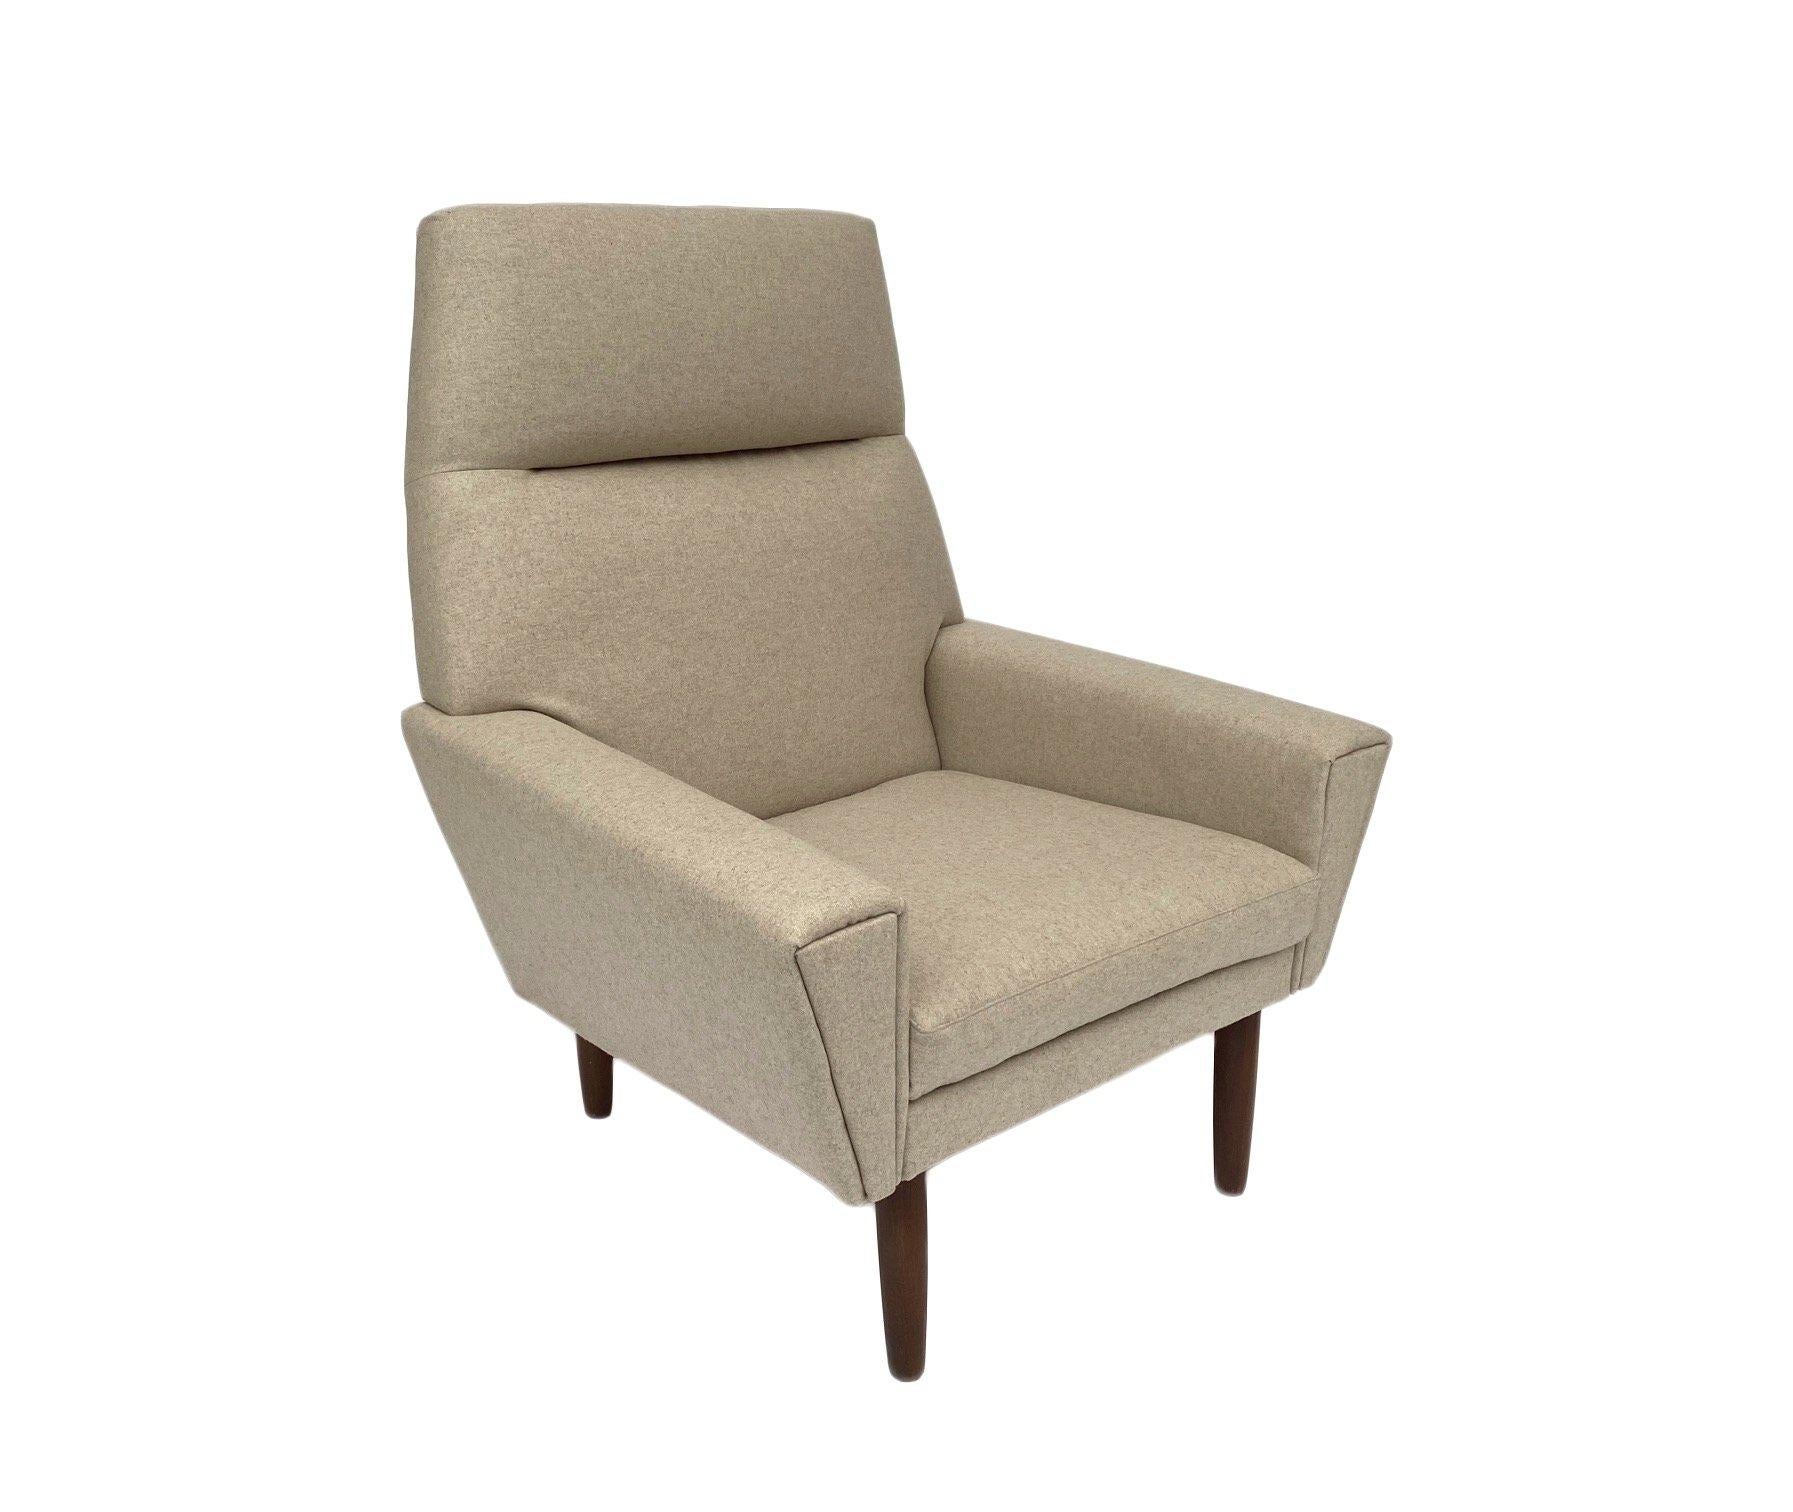 A beautiful Danish cream wool and teak highback armchair, this would make a stylish addition to any living or work area.

The chair has a wide seat and padded backrest for enhanced comfort. A striking piece of classic Scandinavian